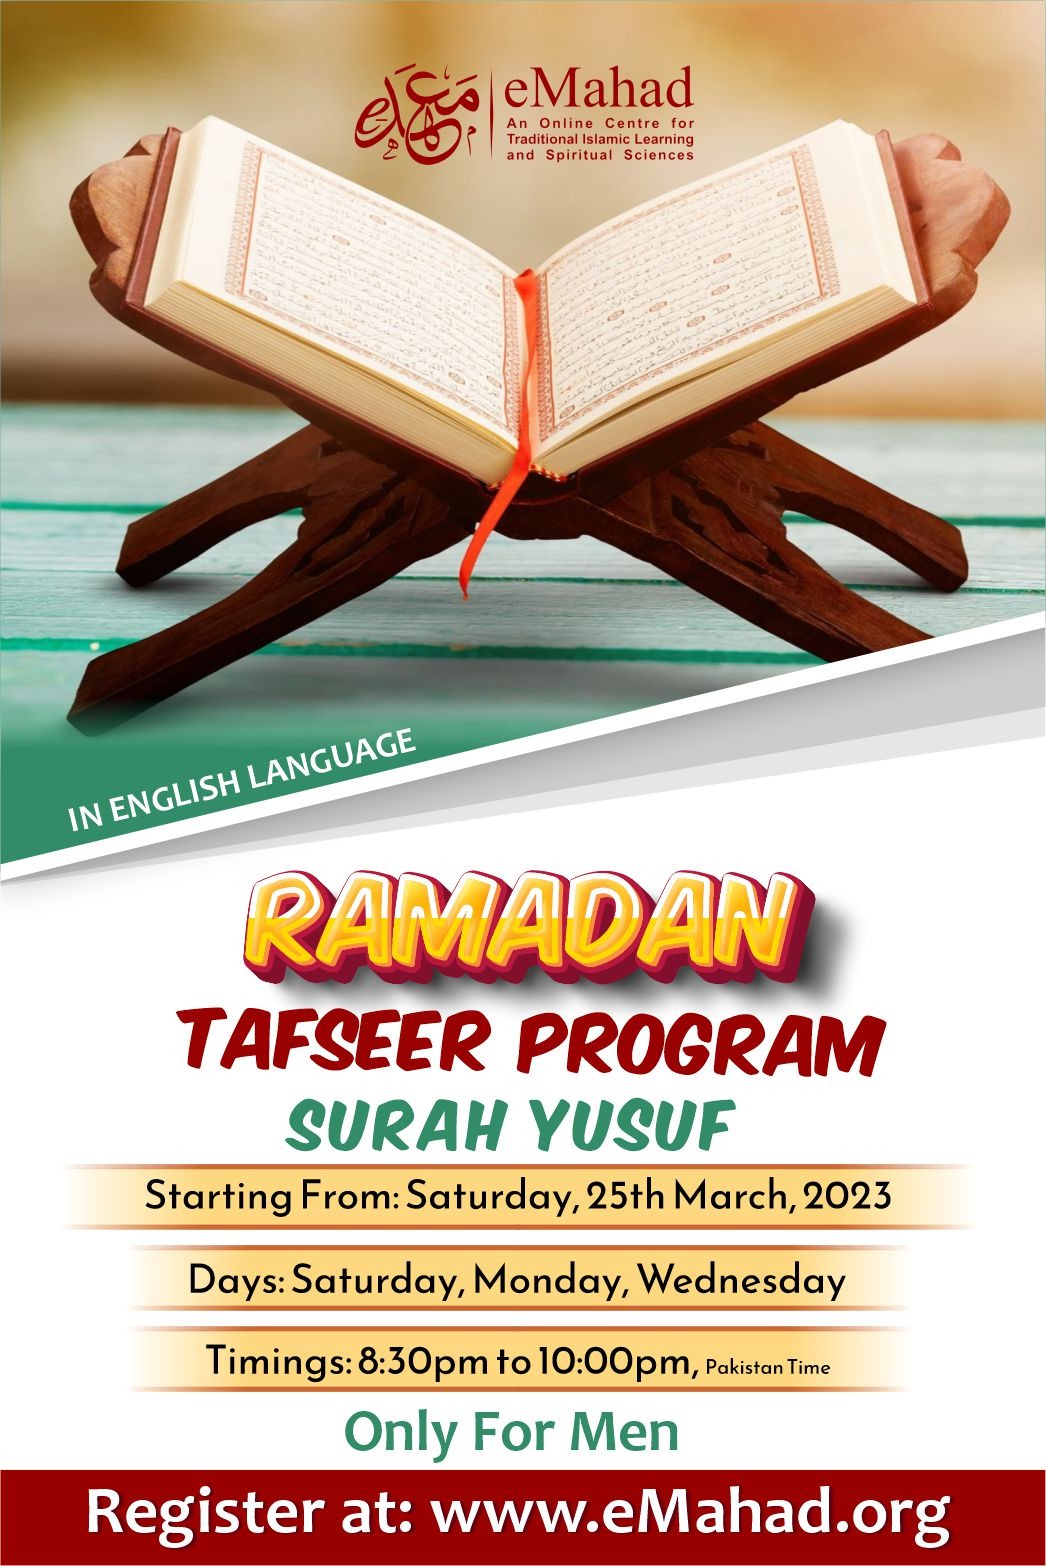 RAMADAN TAFSEER - Surah Yousuf 2023  | In English Language  | For Brothers Only | Free Online Short Course